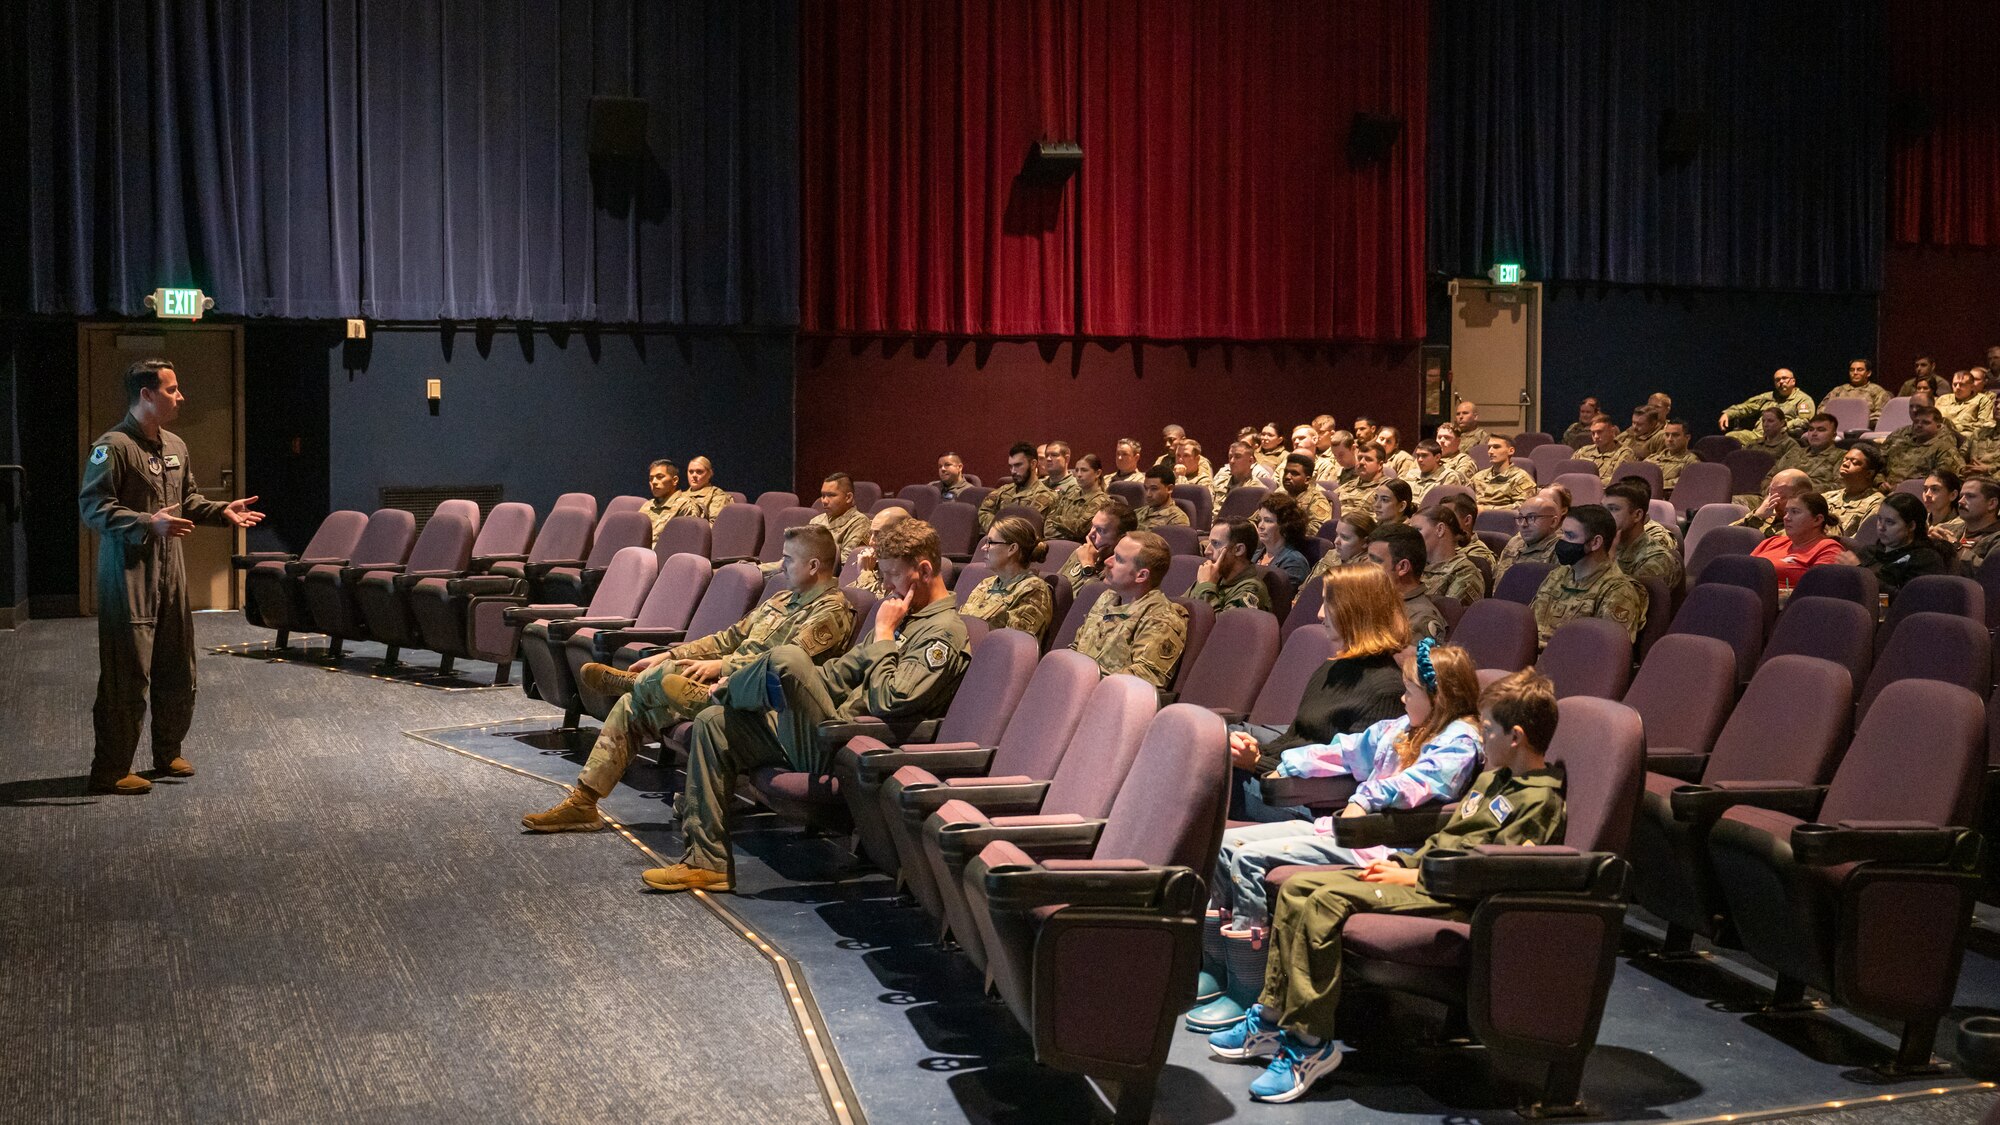 Photo U.S. Air Force Col. Kevin Jamieson speaking to the crowd inside a theater.